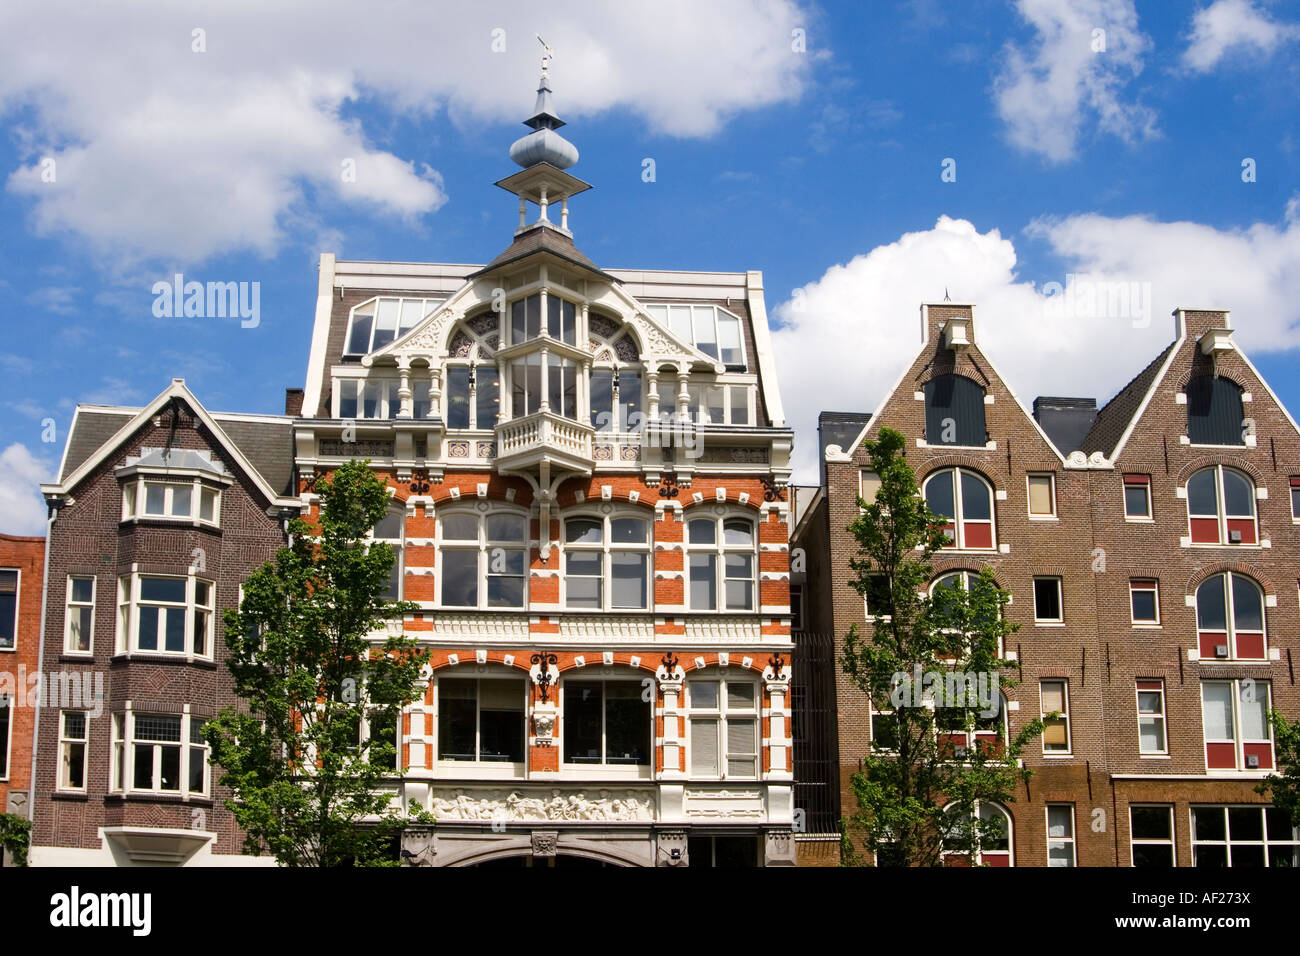 Amsterdam traditional architecture canalside houses Stock Photo